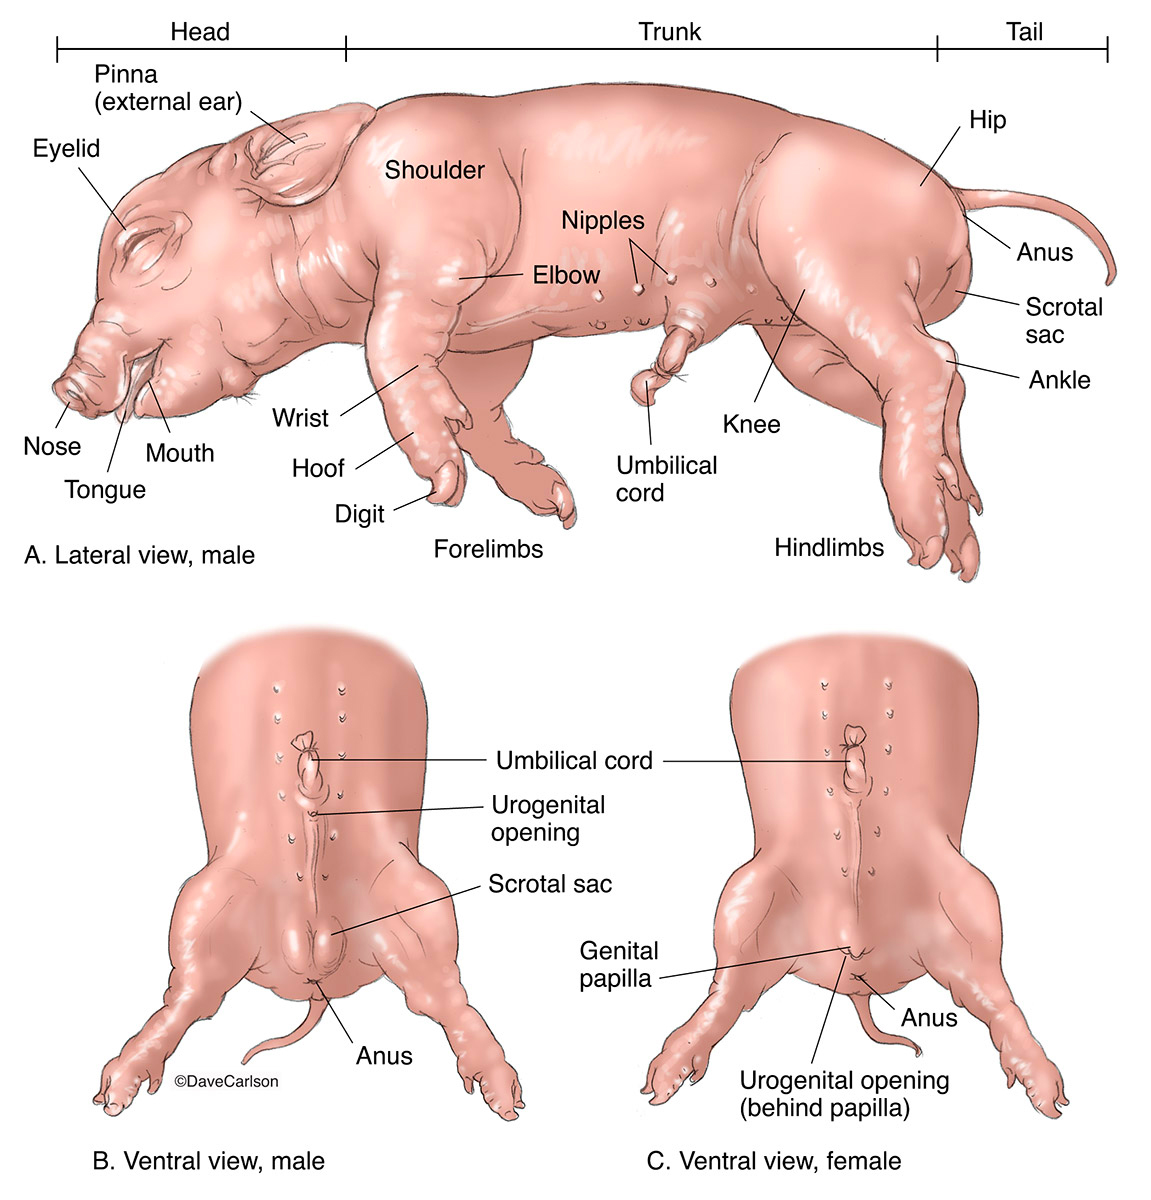 Illustration overview of surface features of the fetal pig.